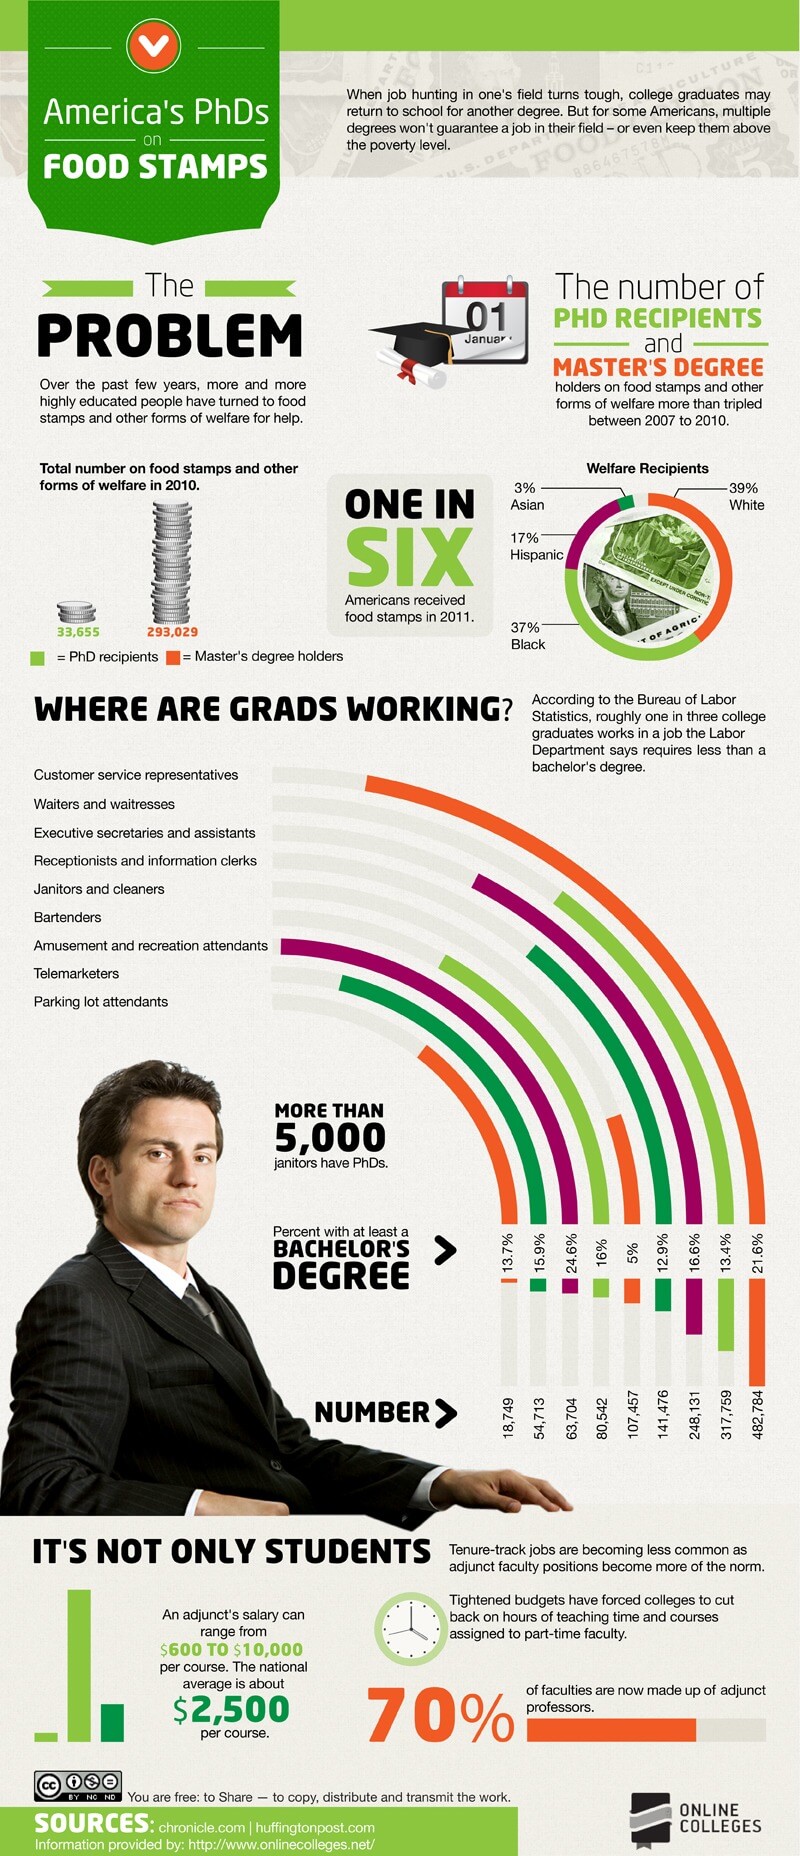 America's PHDs on Food Stamps infographic